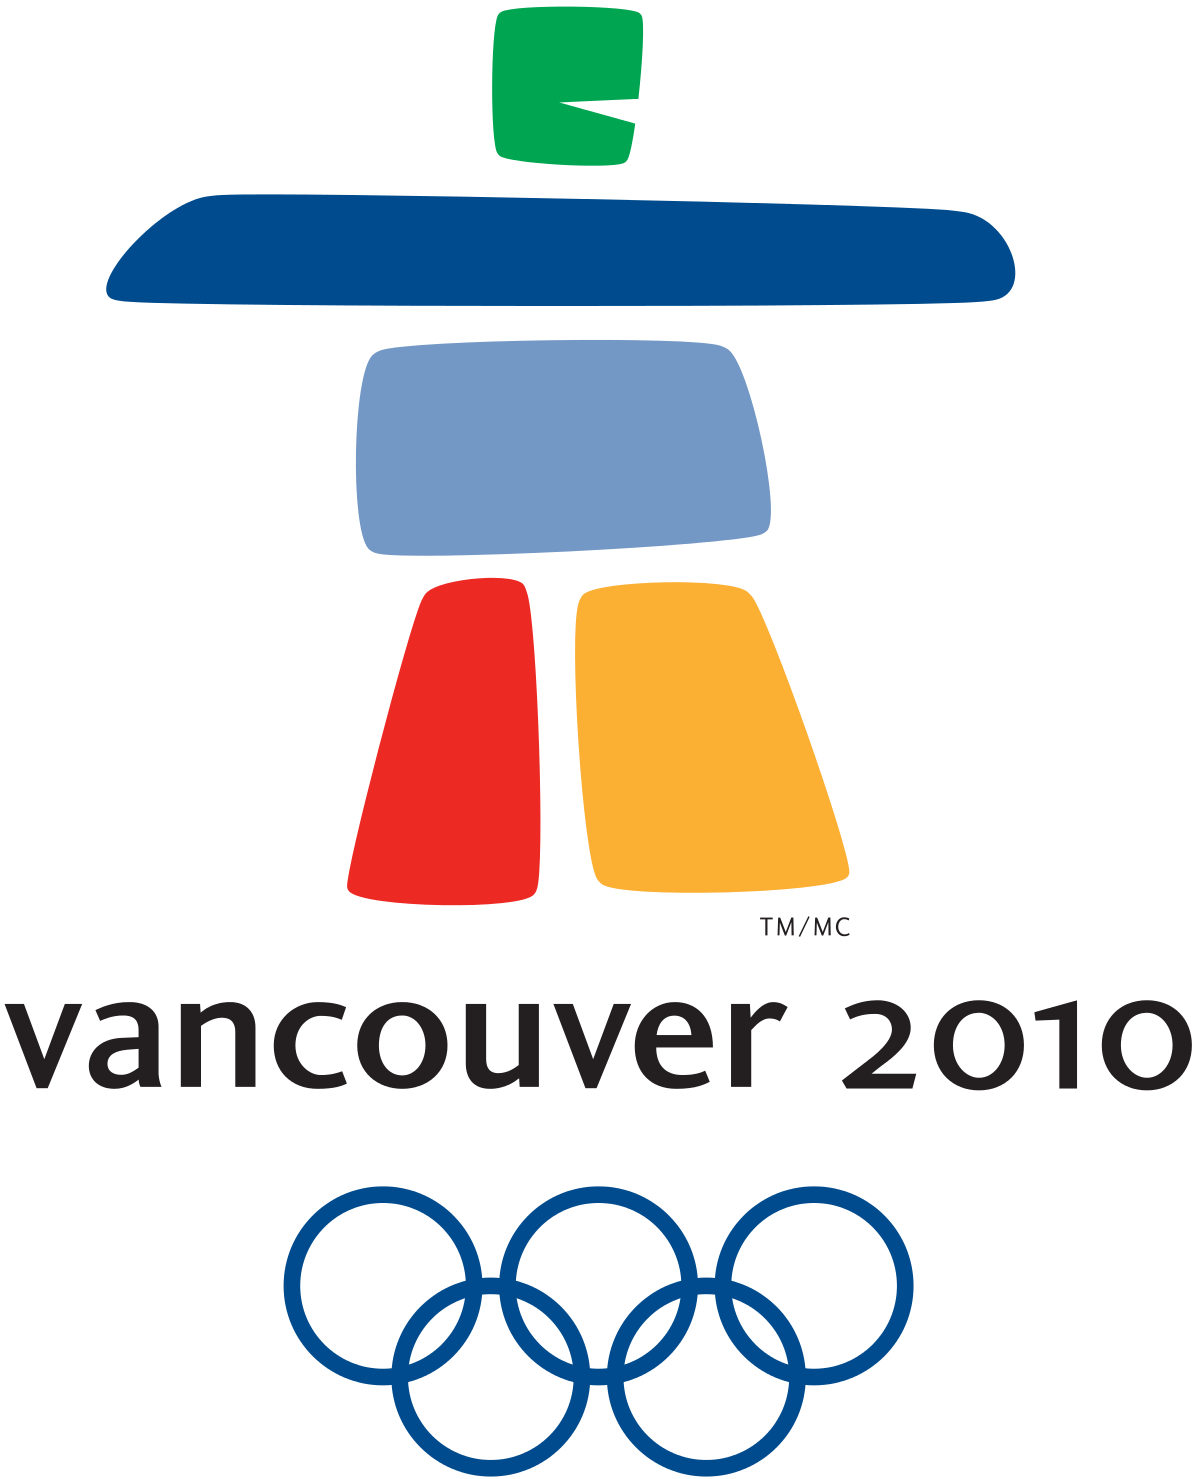 Nice Images Collection: Winter Olympics Vancouver 2010 Desktop Wallpapers